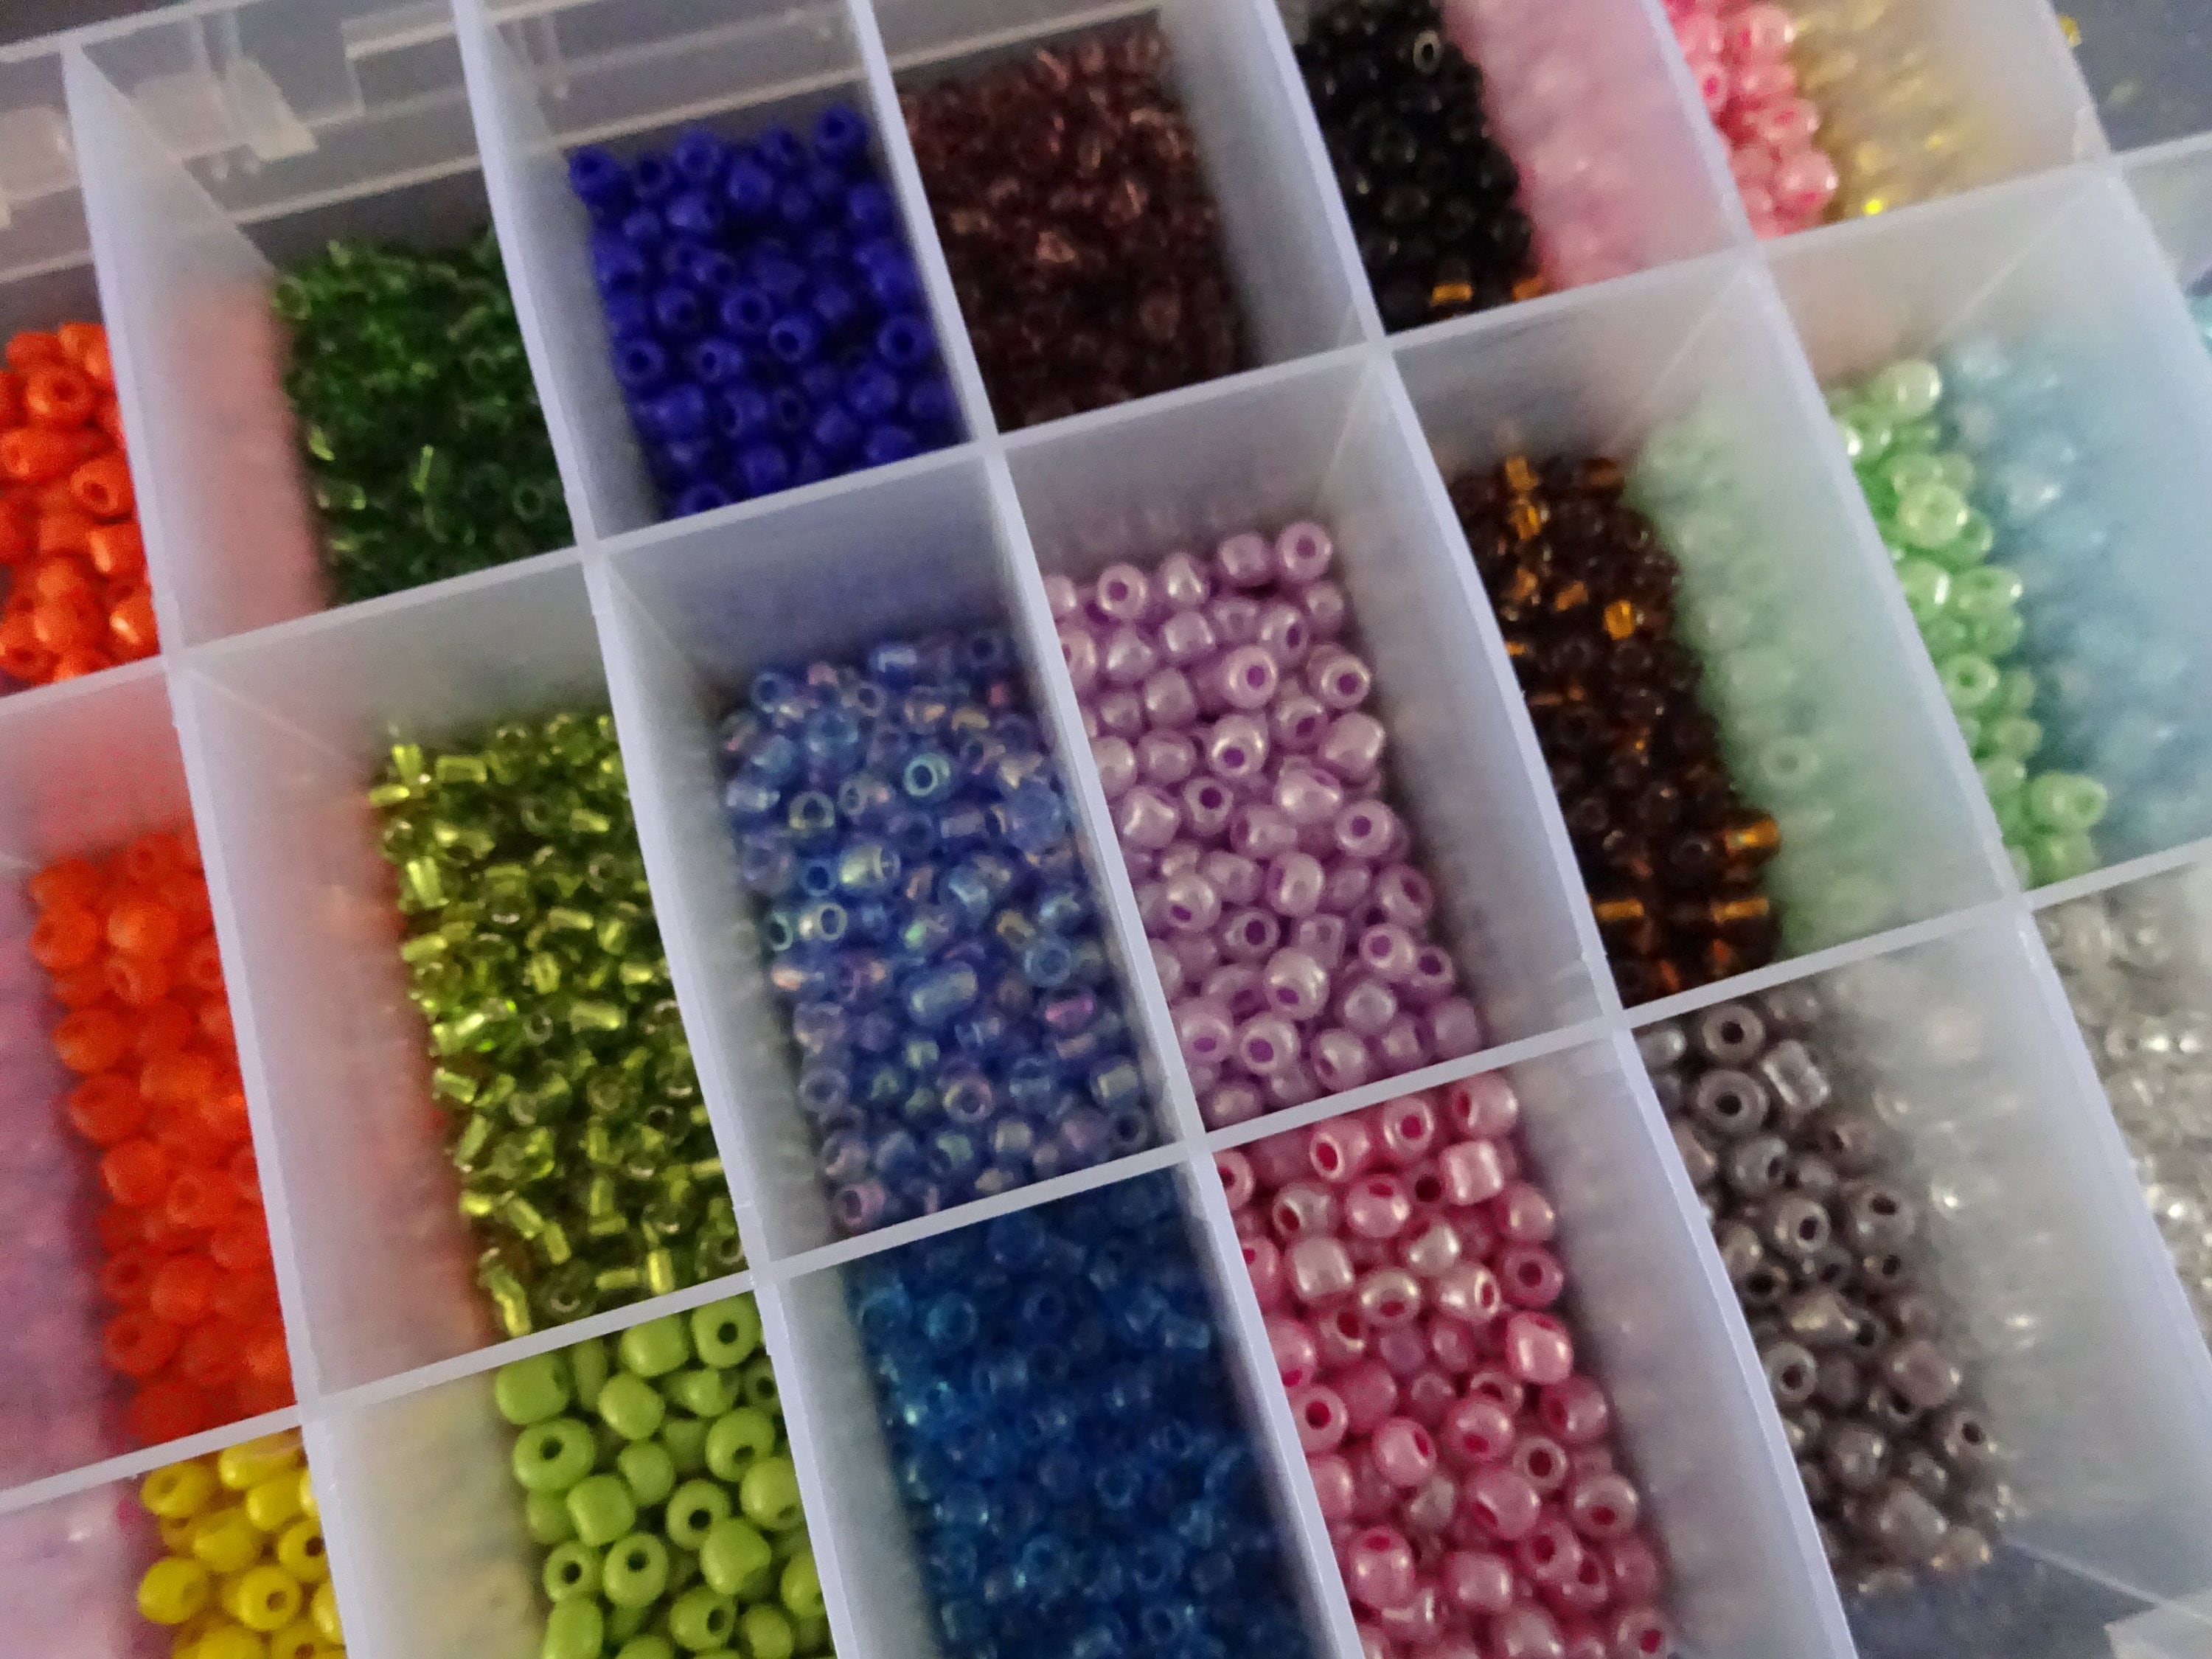 15 Mix Color Glass Seed Bead Kit, Size 6/0 or 12/0 , 2 or 4mm, 240027000,  DIY, Kid's Crafts, Green Pink Yellow Black Brown White Clear Blue 